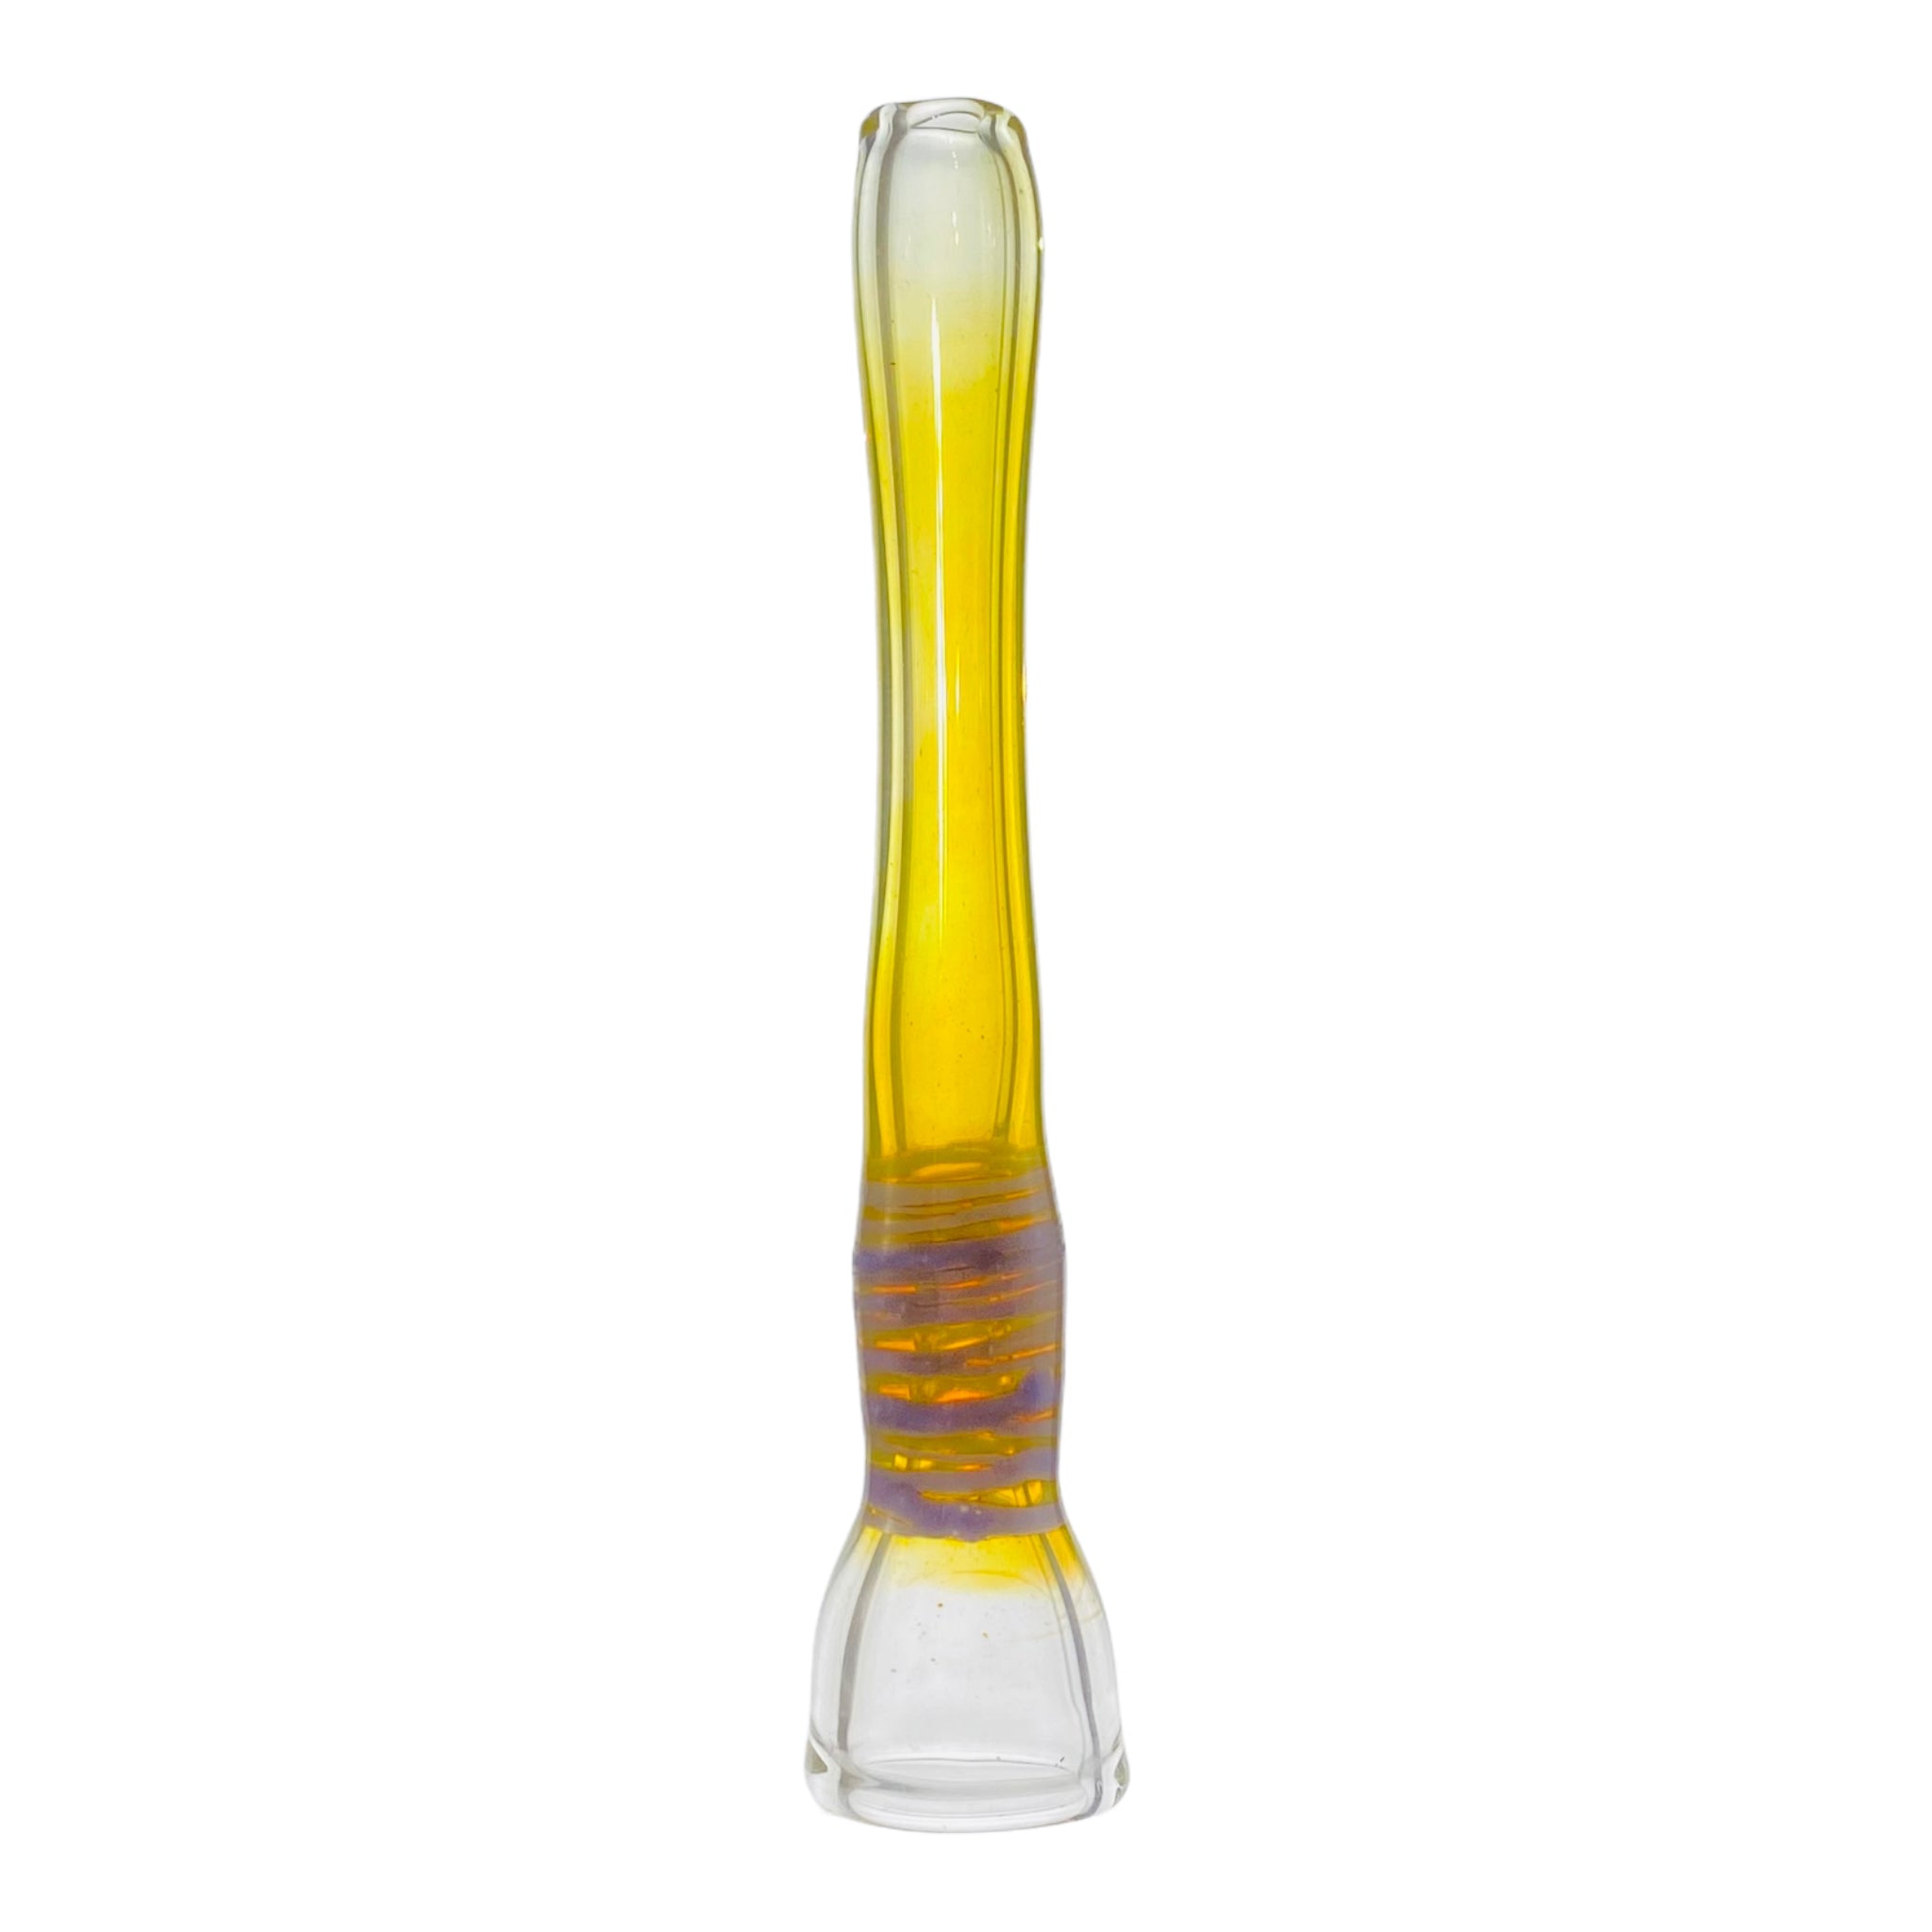 Glass Chillum Pipe - Yellow Silver Fuming With Purple Wrap